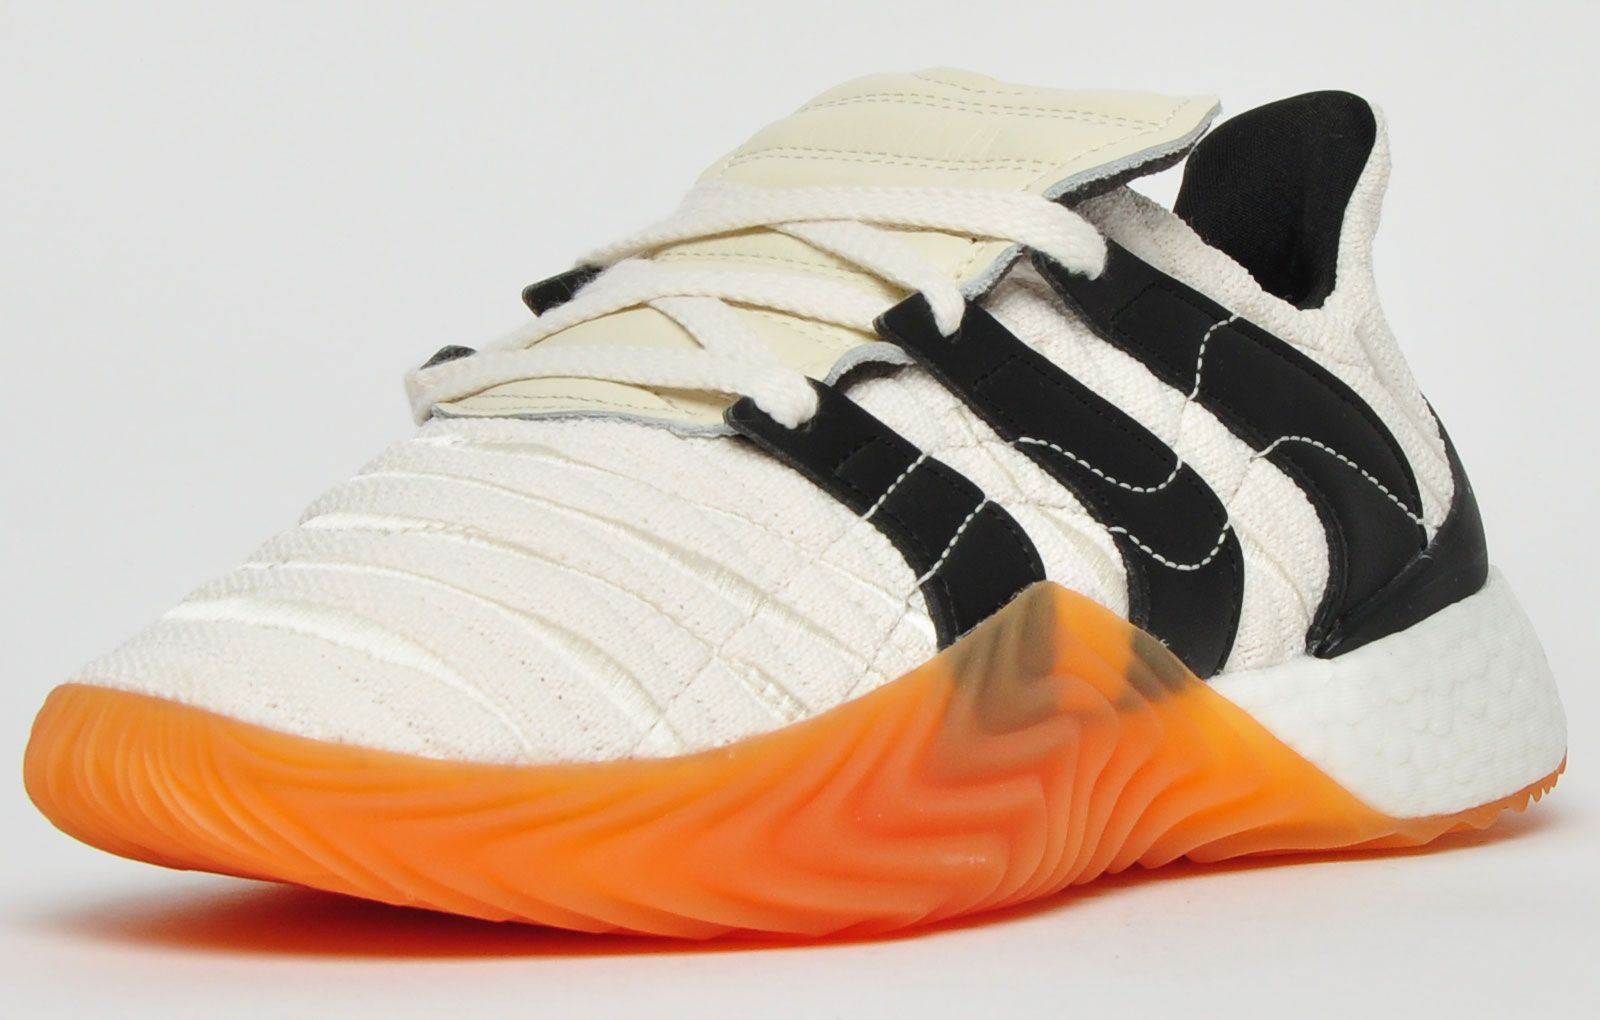 <p>Inspired by the passion of football, Adidas have given the Predator-inspired Sobakov an update, introducing an exclusive Boost midsole, along with a new Accelerator-styled look.</p> <p>Featuring the same rippled upper in a textured knit with designer stitch detailing as well as the famous three stripe branding in a curve design with an on trend wave styled outsole for a standout design with an additional heel cup featuring around the ankle for added support</p> <p class=